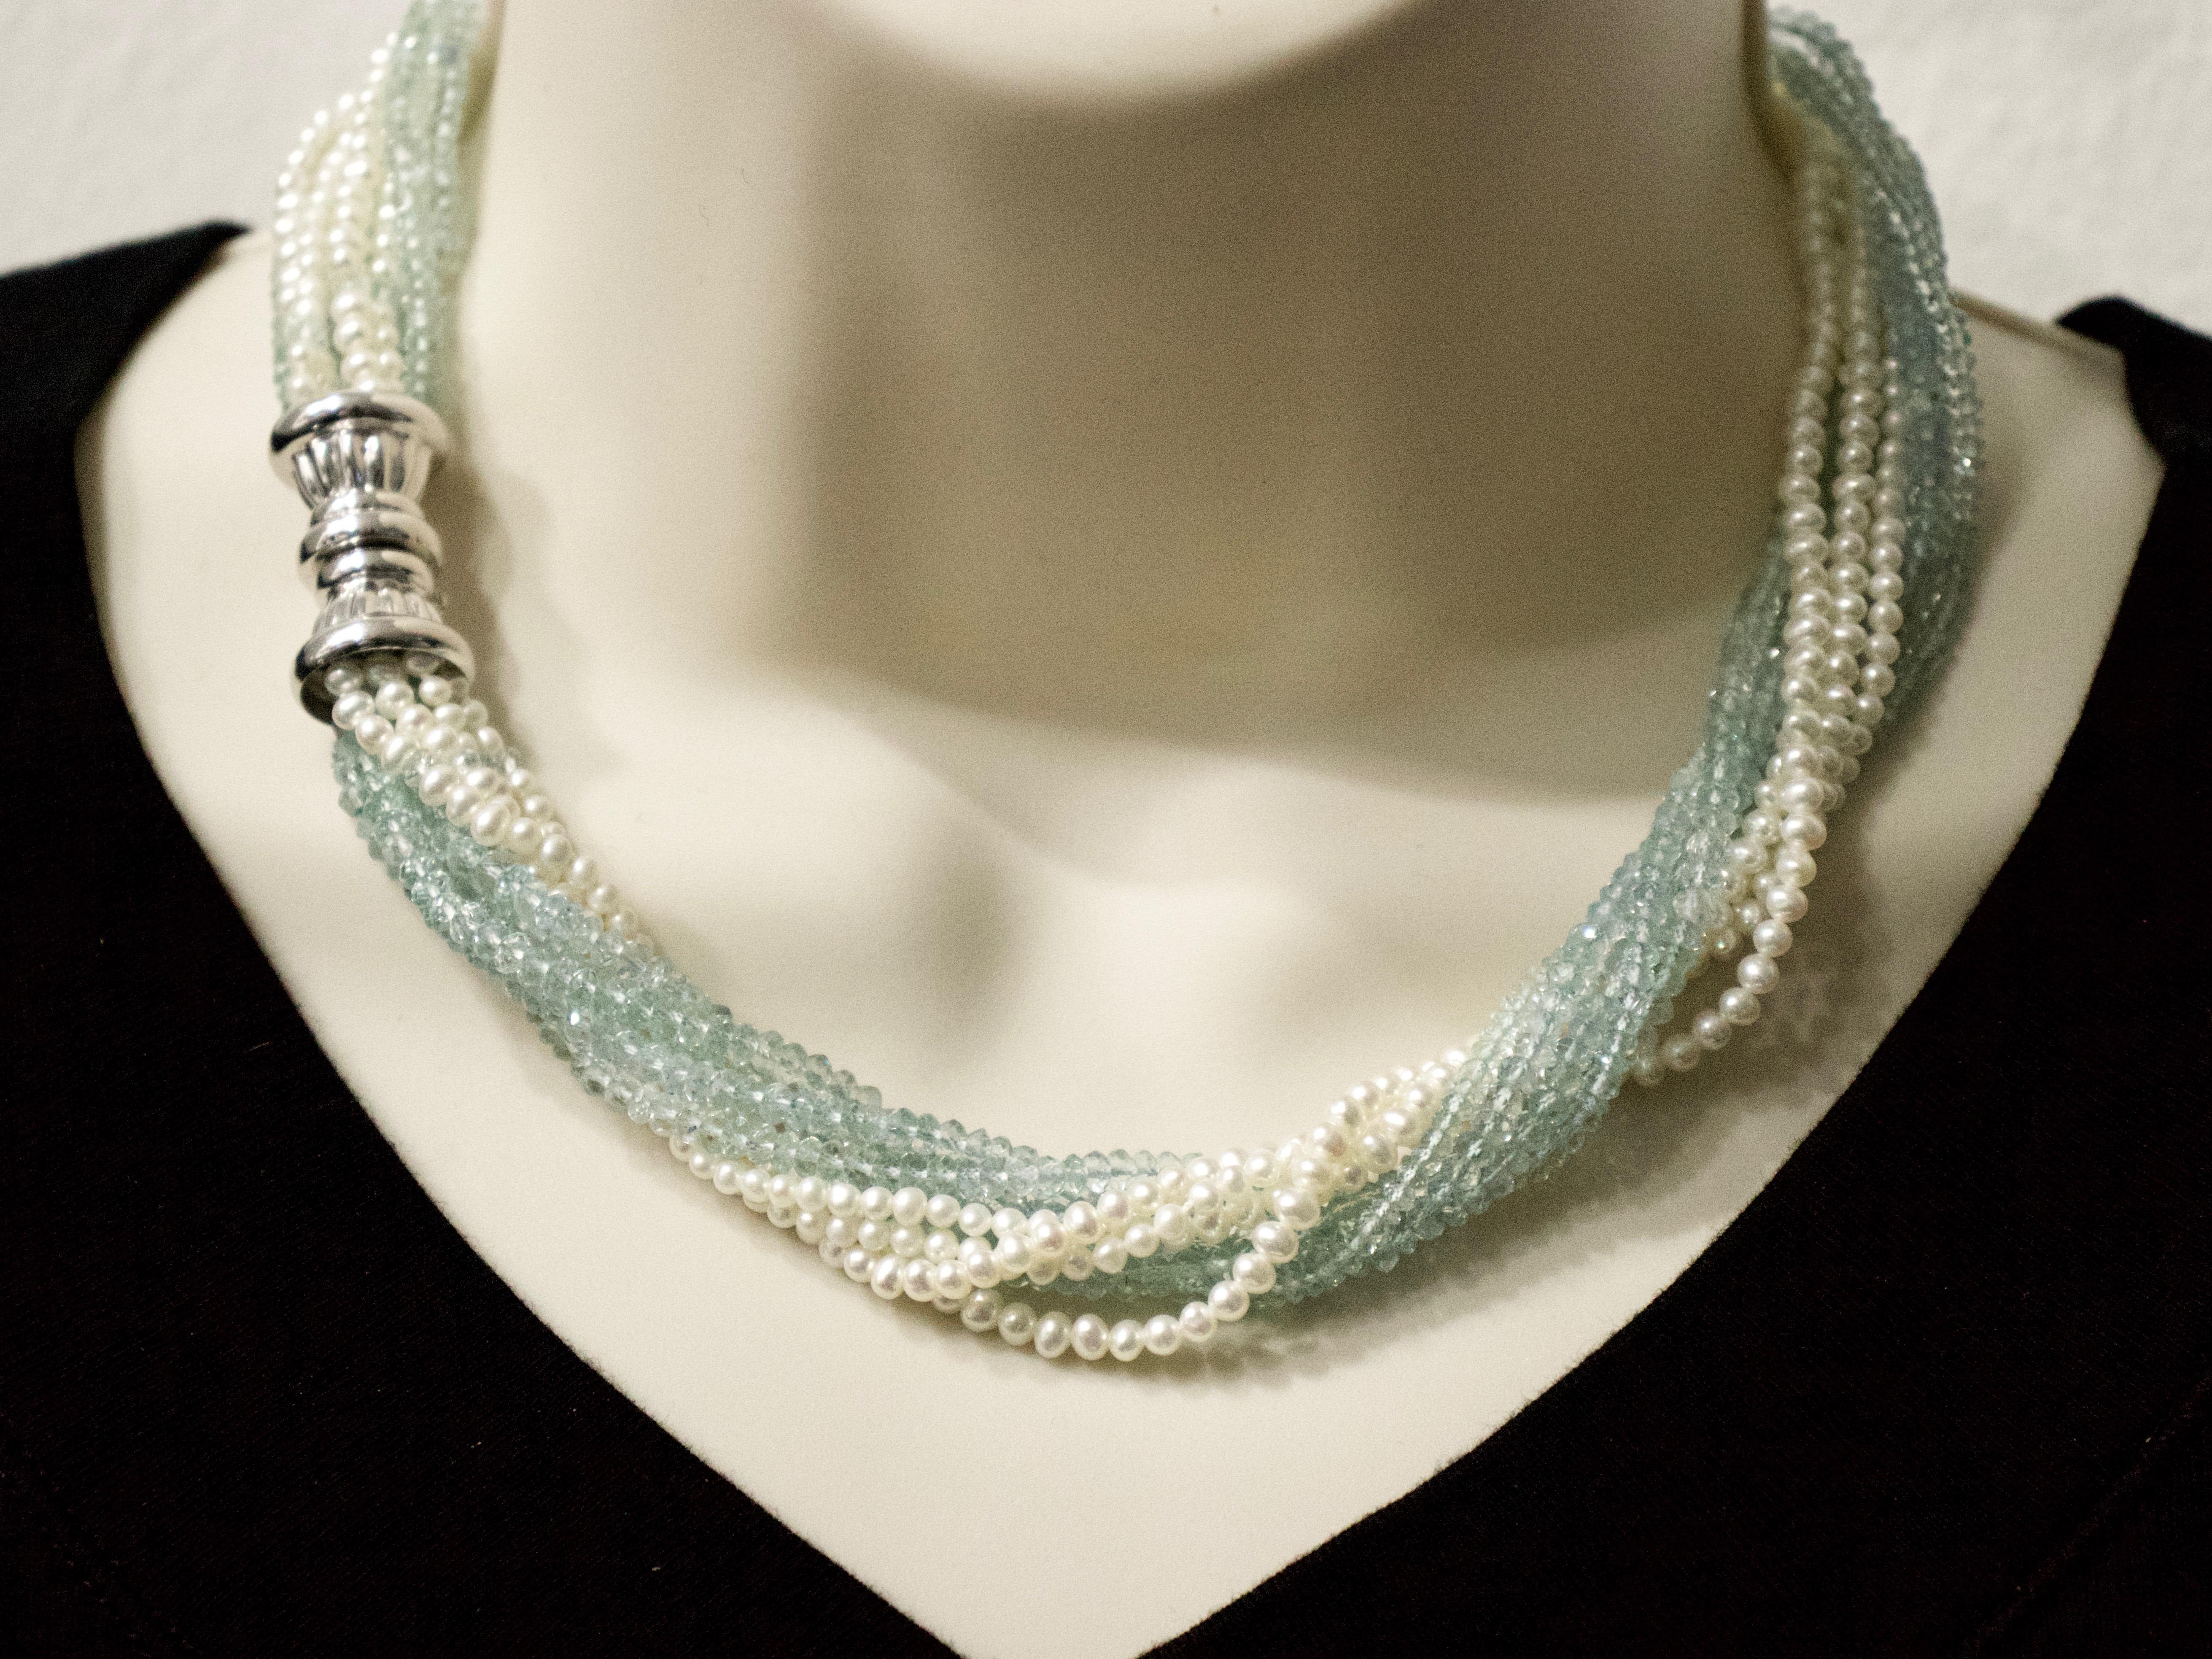 Stunning faceted ocean blue of the finest quality 3.33mm aquamarine beads intertwined with white seed pearls to make a 10-strand torsade necklace joined together with a 18k white gold Italian clasp.
This handmade and exclusive creation will shine at